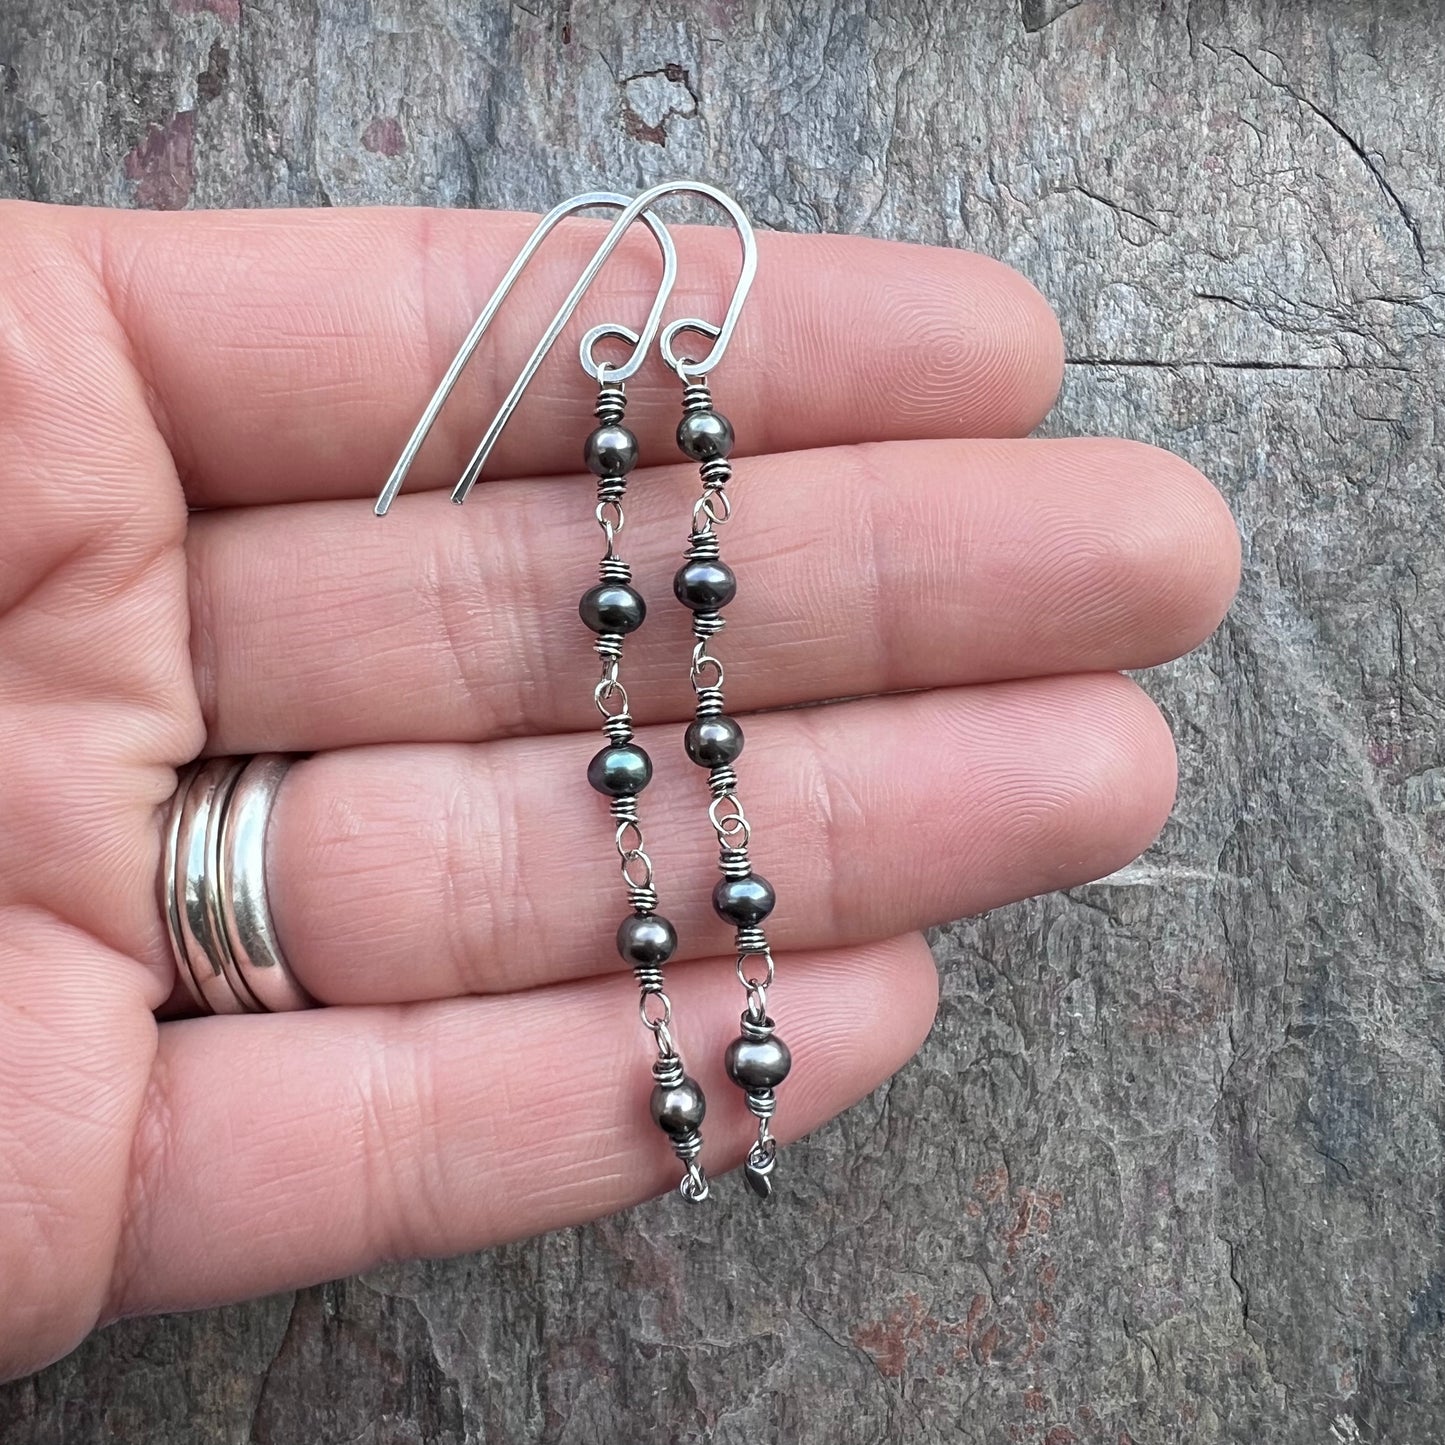 Sterling Silver and Black Pearl Earrings - Genuine Pearls Wrapped in Sterling Silver Wire